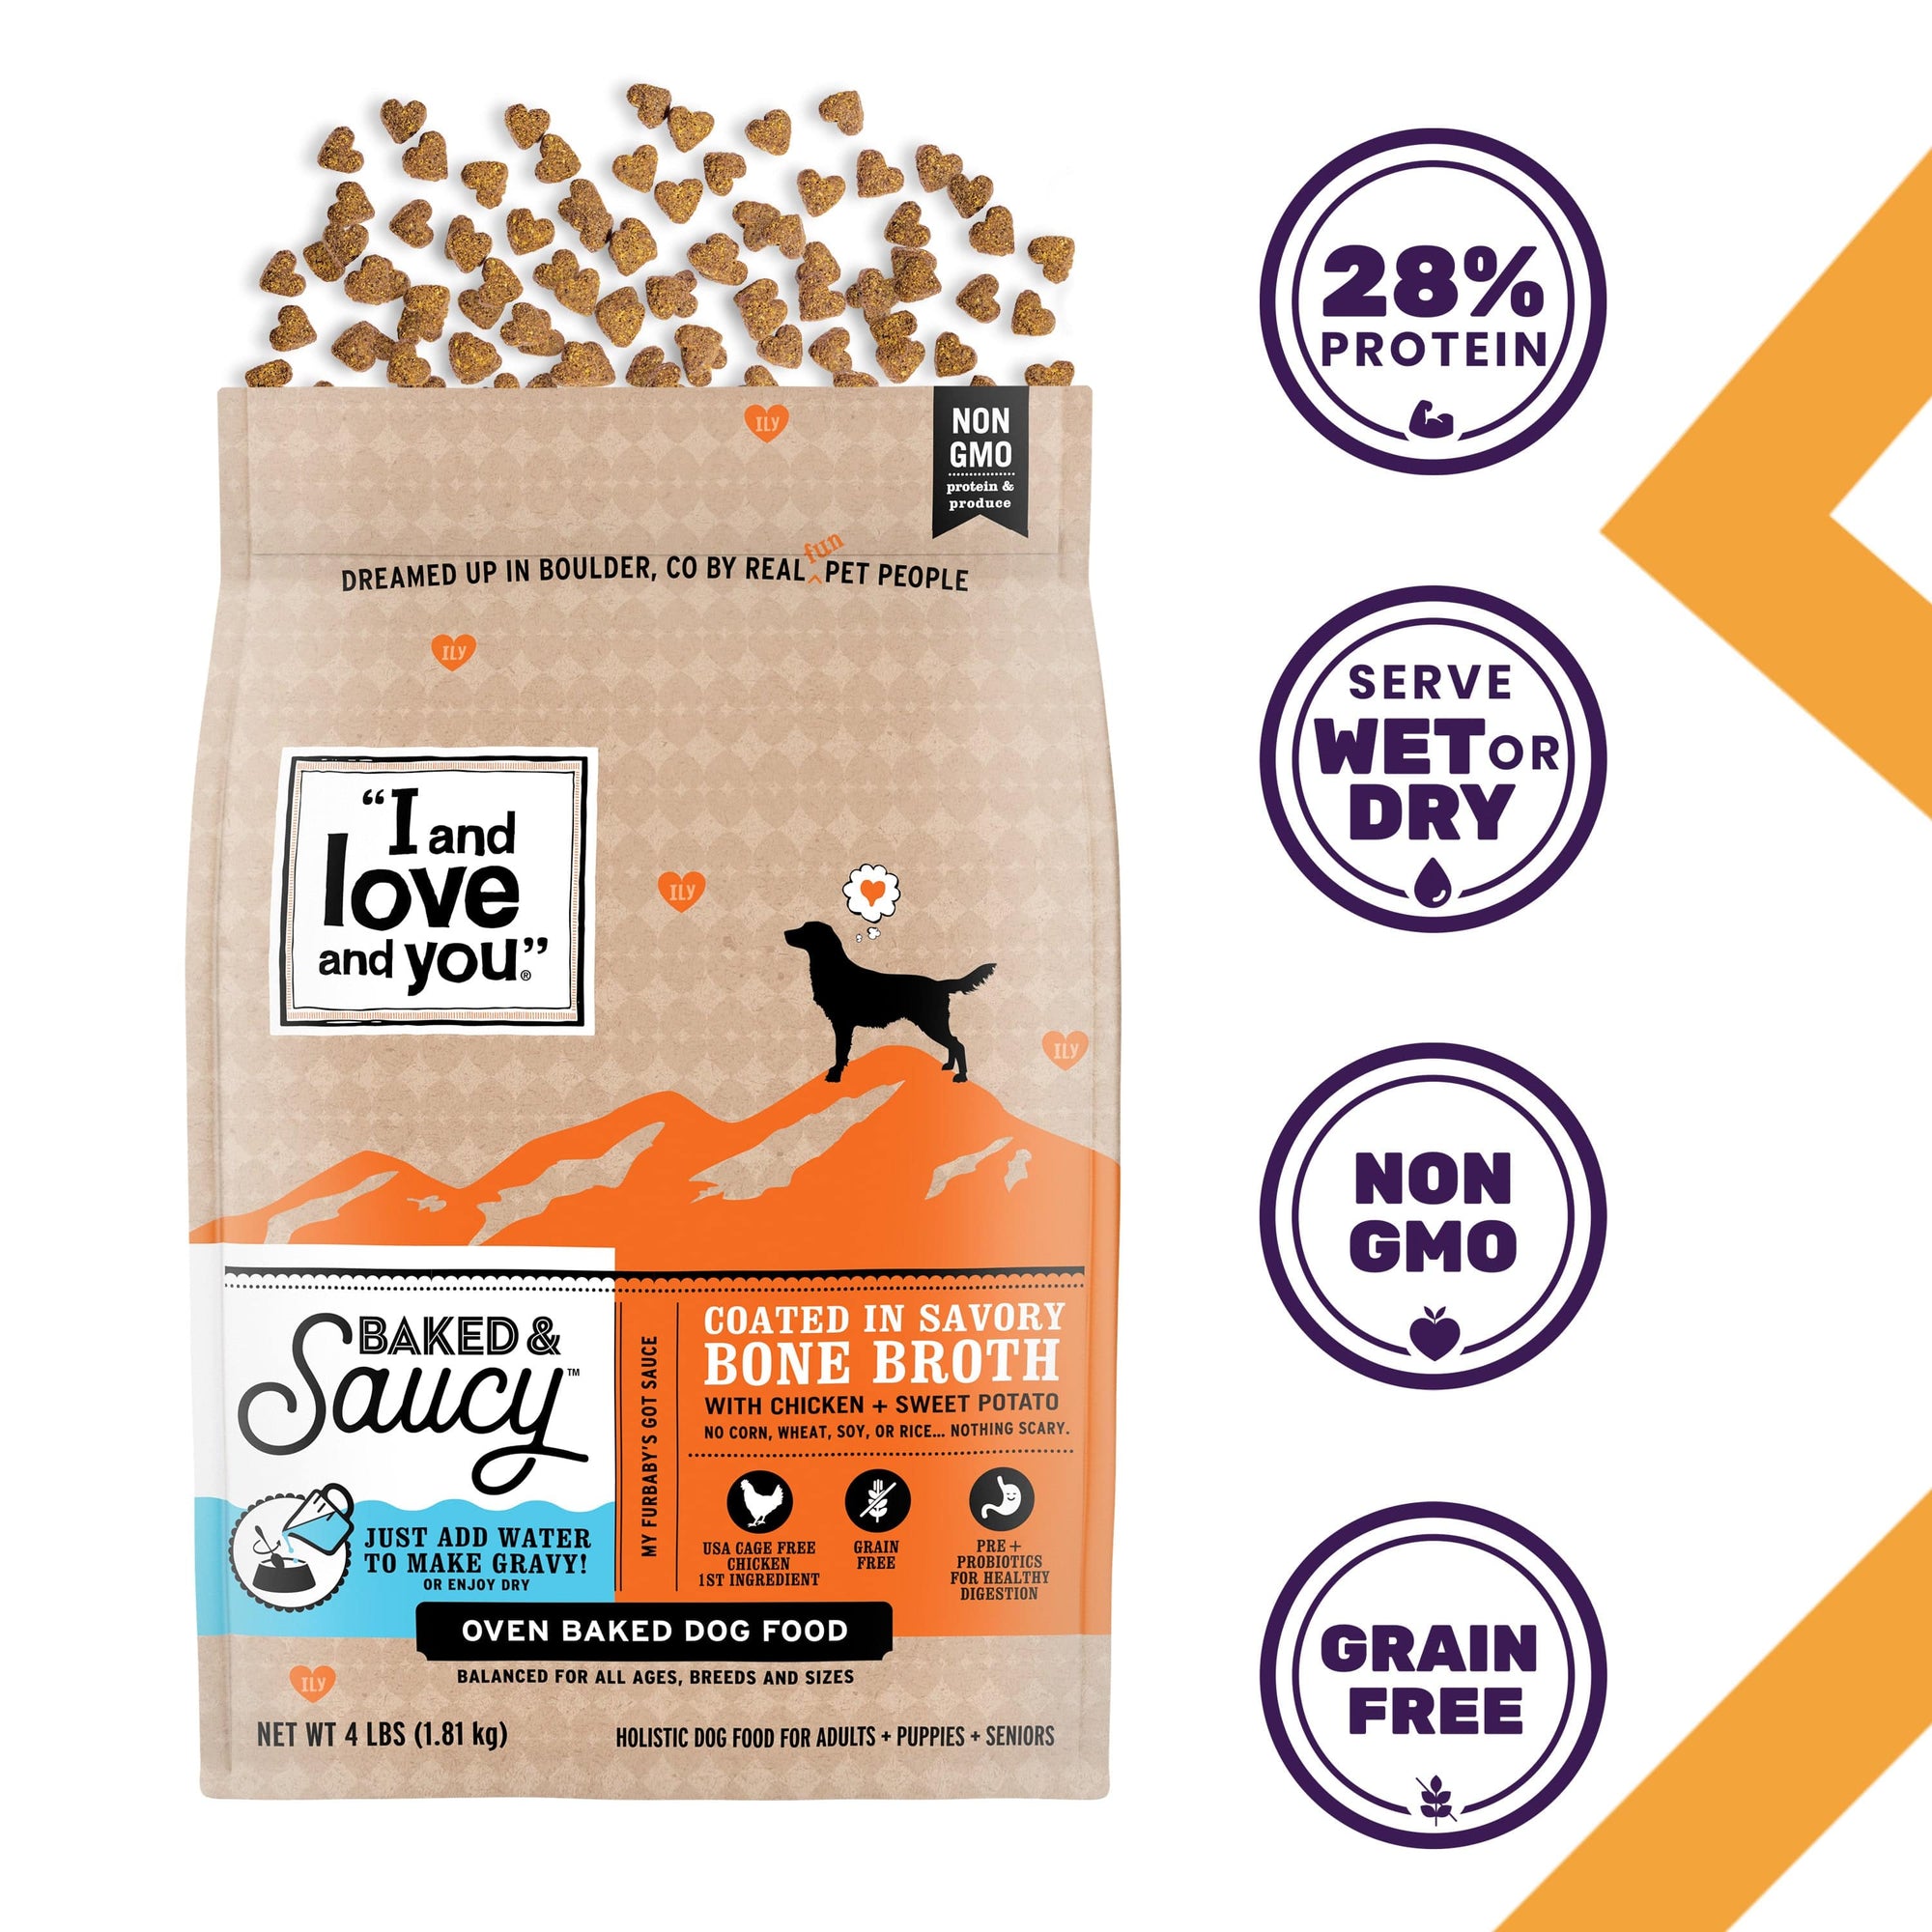 Baked & Saucy - Chicken + Sweet Potato heart-shaped kibble in a bag with a silhouette of a dog and text signs.